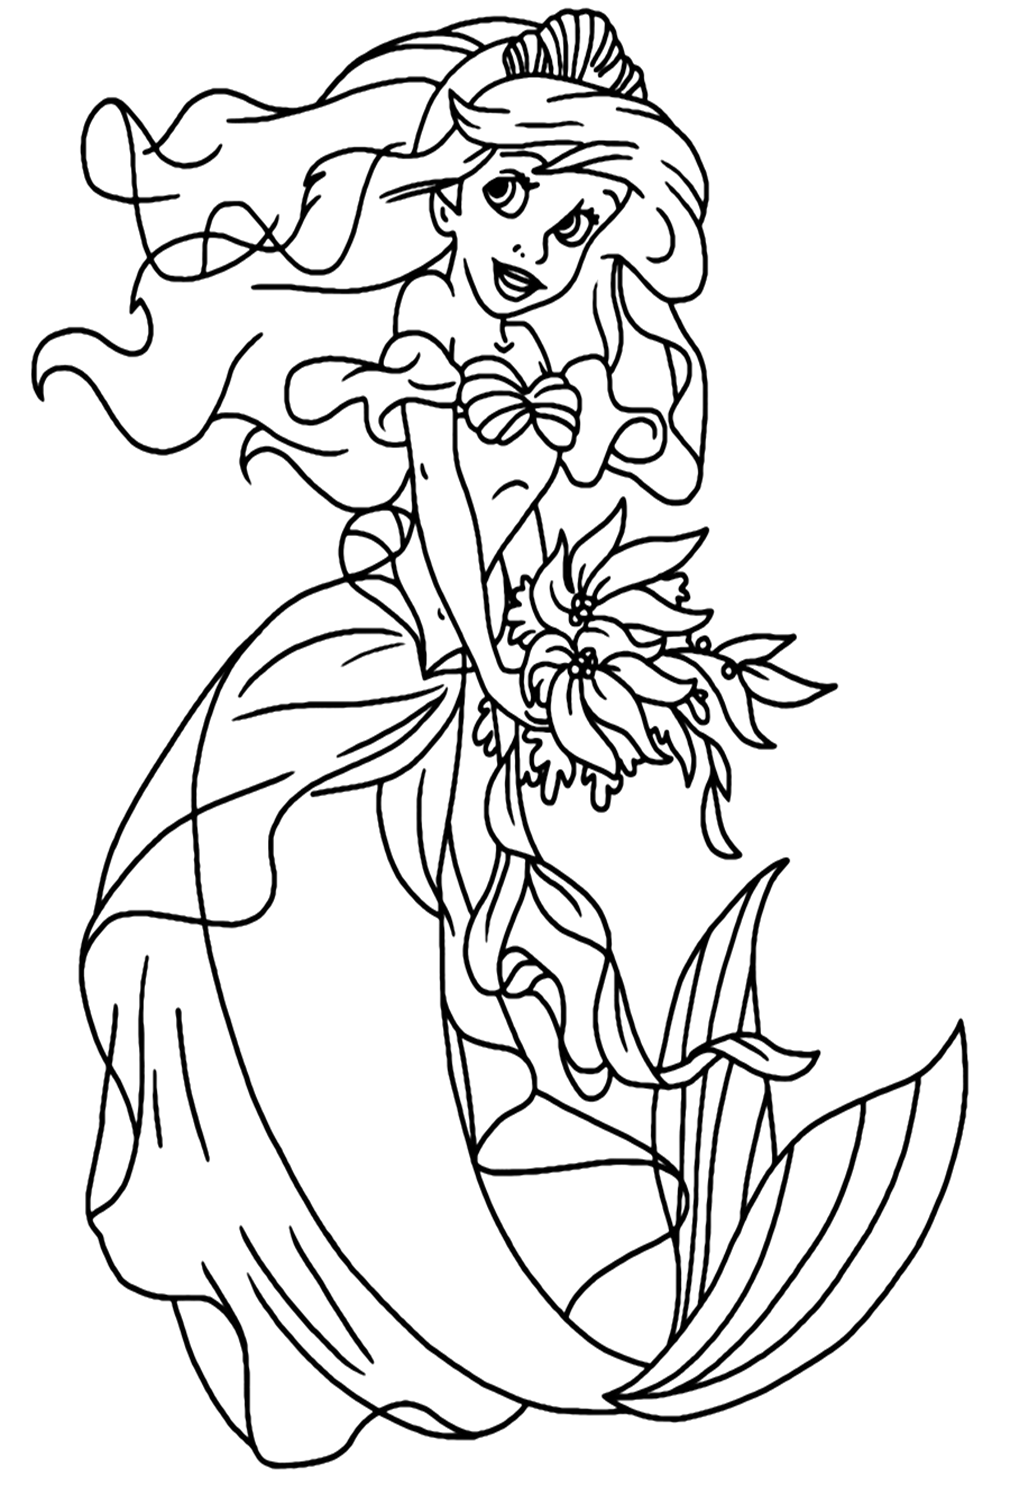 Ariel with Beautiful Dress Coloring Pages